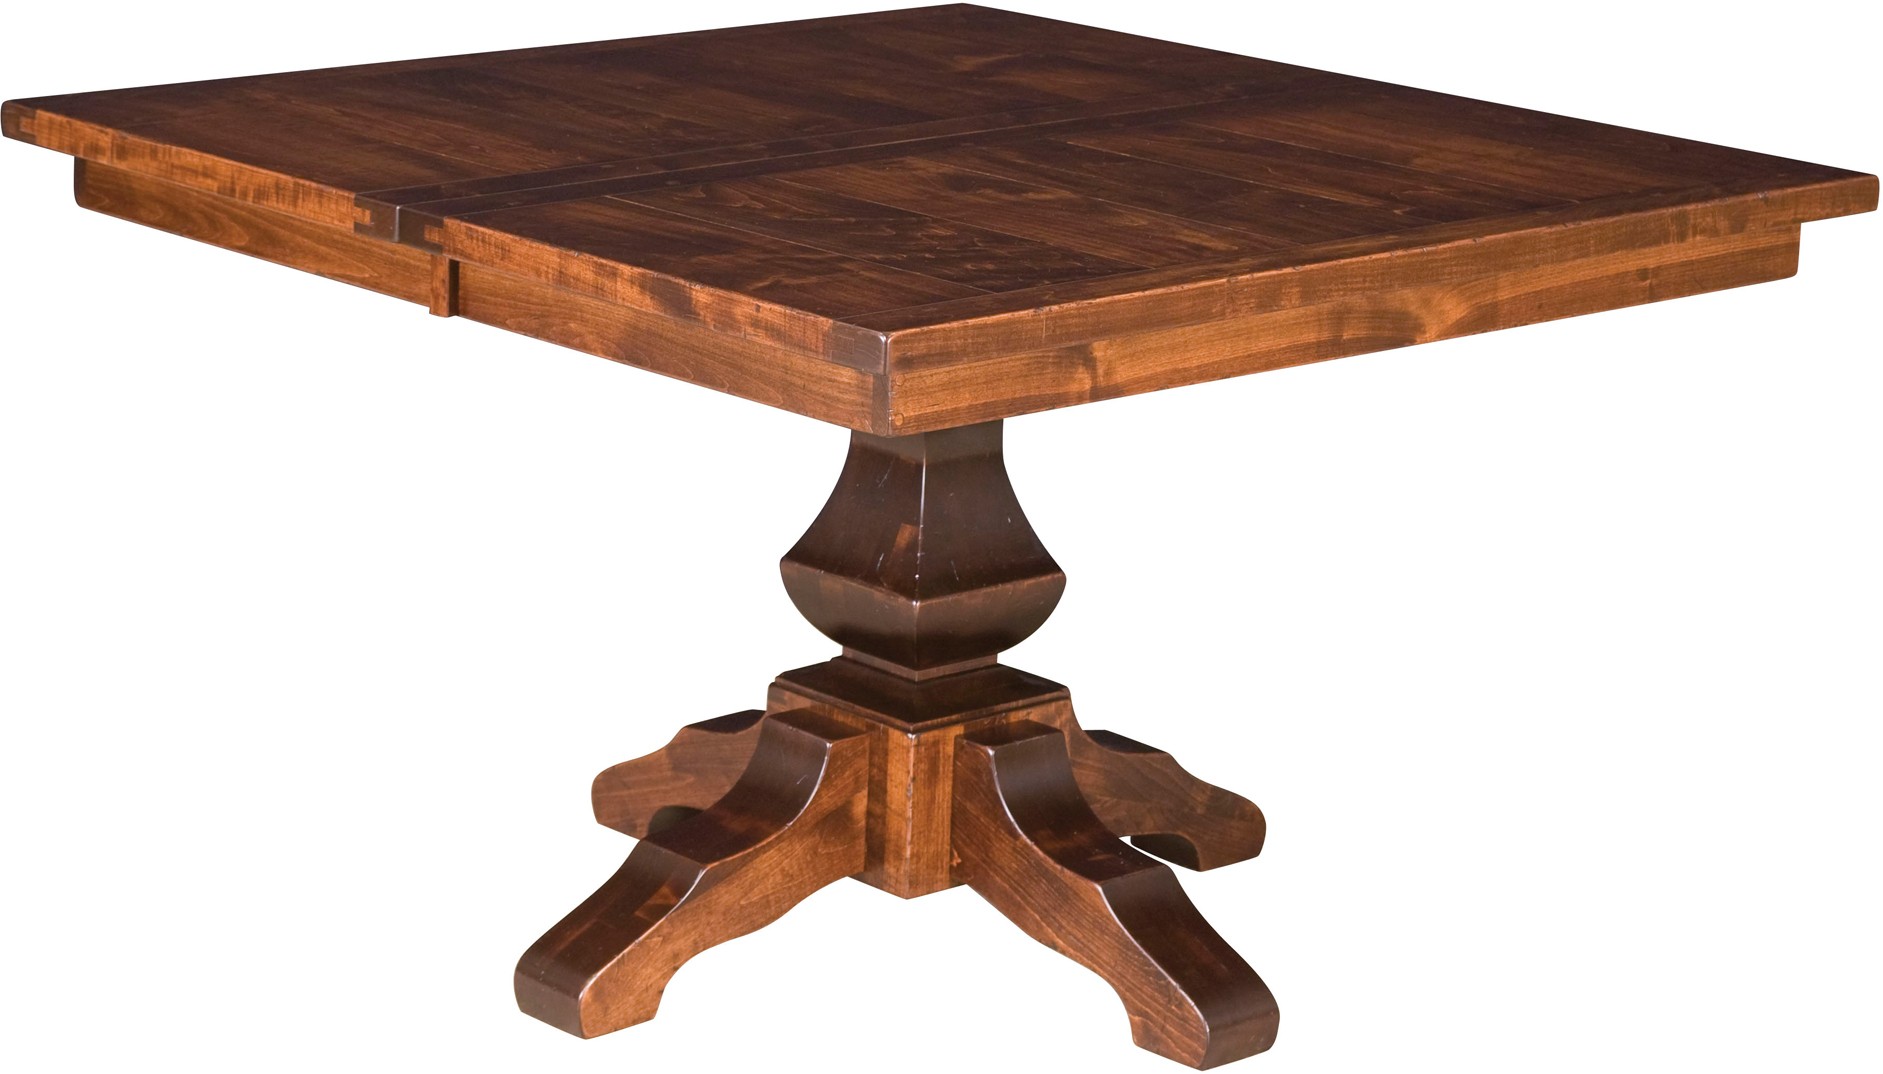 Lincoln square pedestal dining table amish lincoln